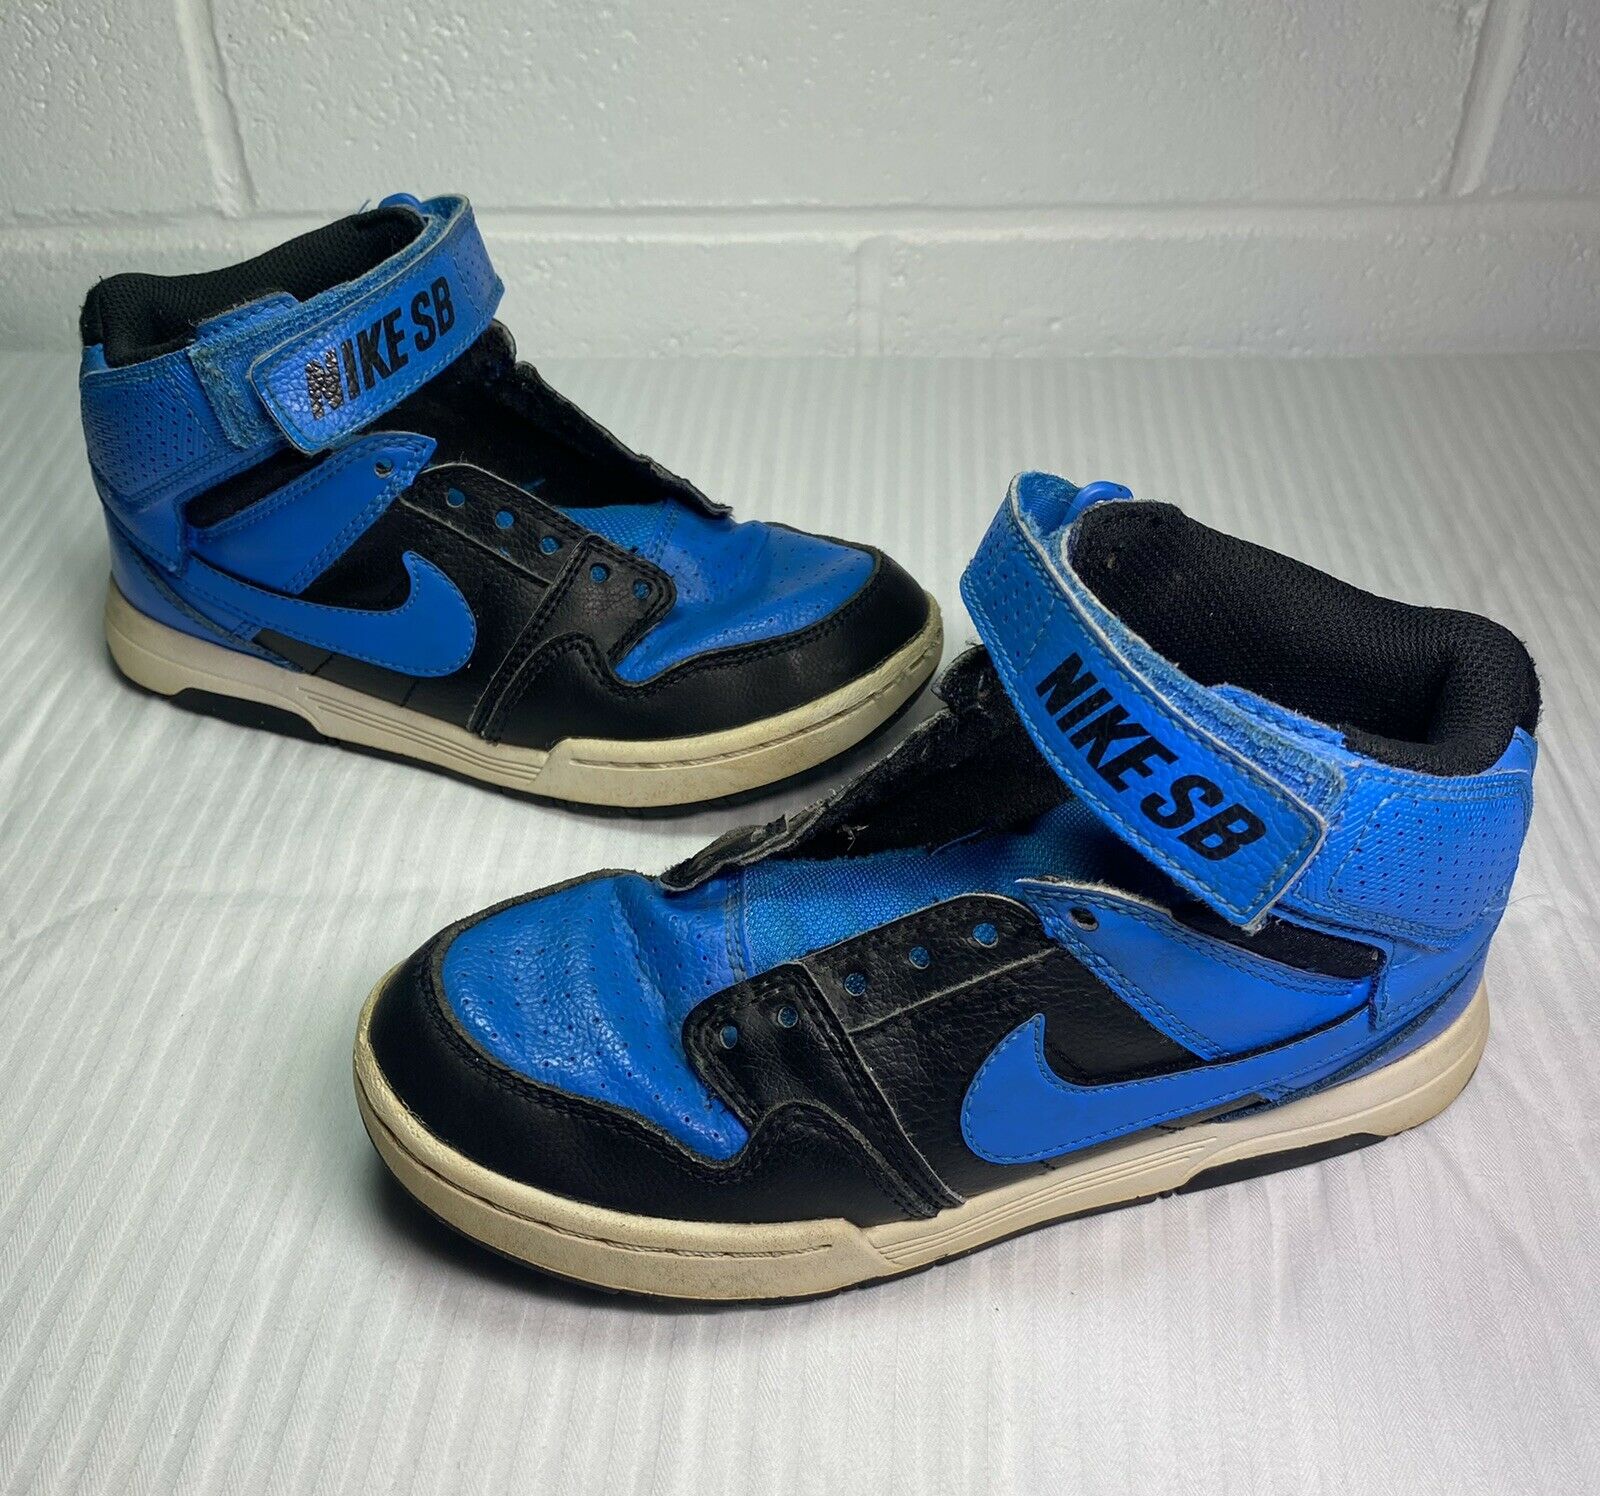 Nike SB Blue High Tops Boys 1Y Youth Shoes/No Laces but Great Shoes.